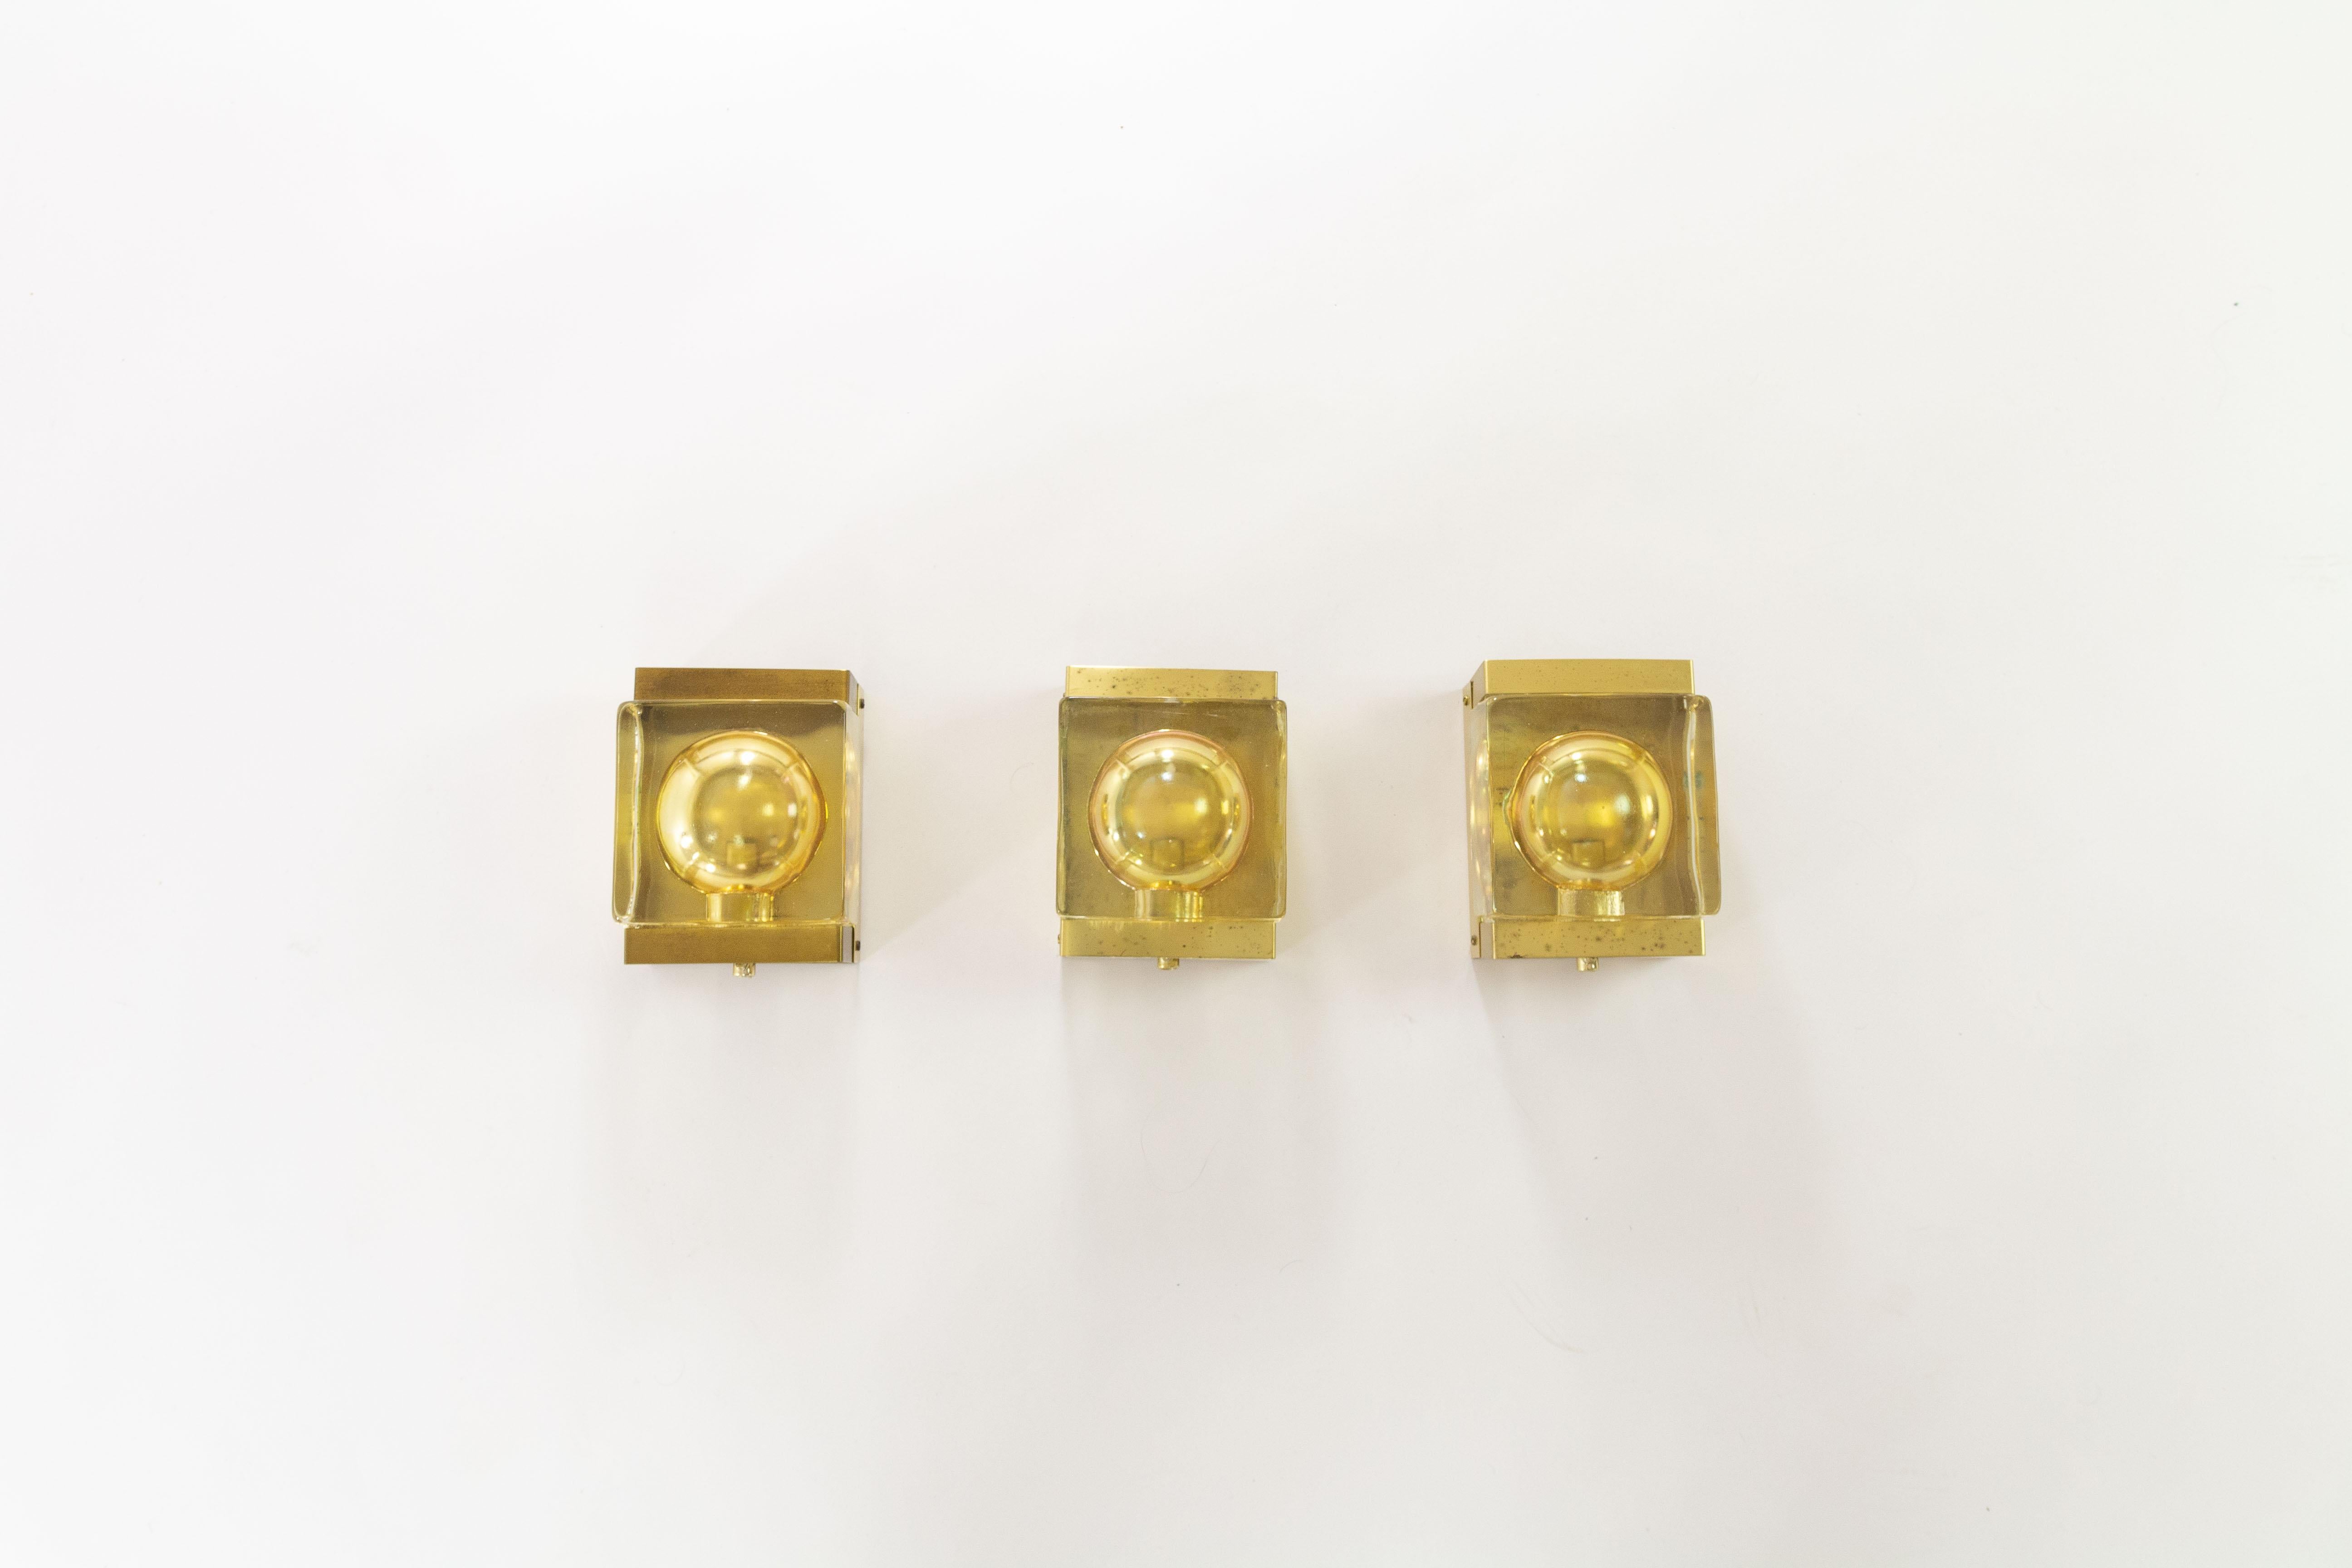 Set of three gold coloured handmade Maritim Lampet wall lamps, produced by Danish lighting manufacturer Vitrika in the 1970s.

Each lamp consists of two parts: a solid and so rather heavy handmade glass body (2.4 kg / 5.3 lbs) and the brass